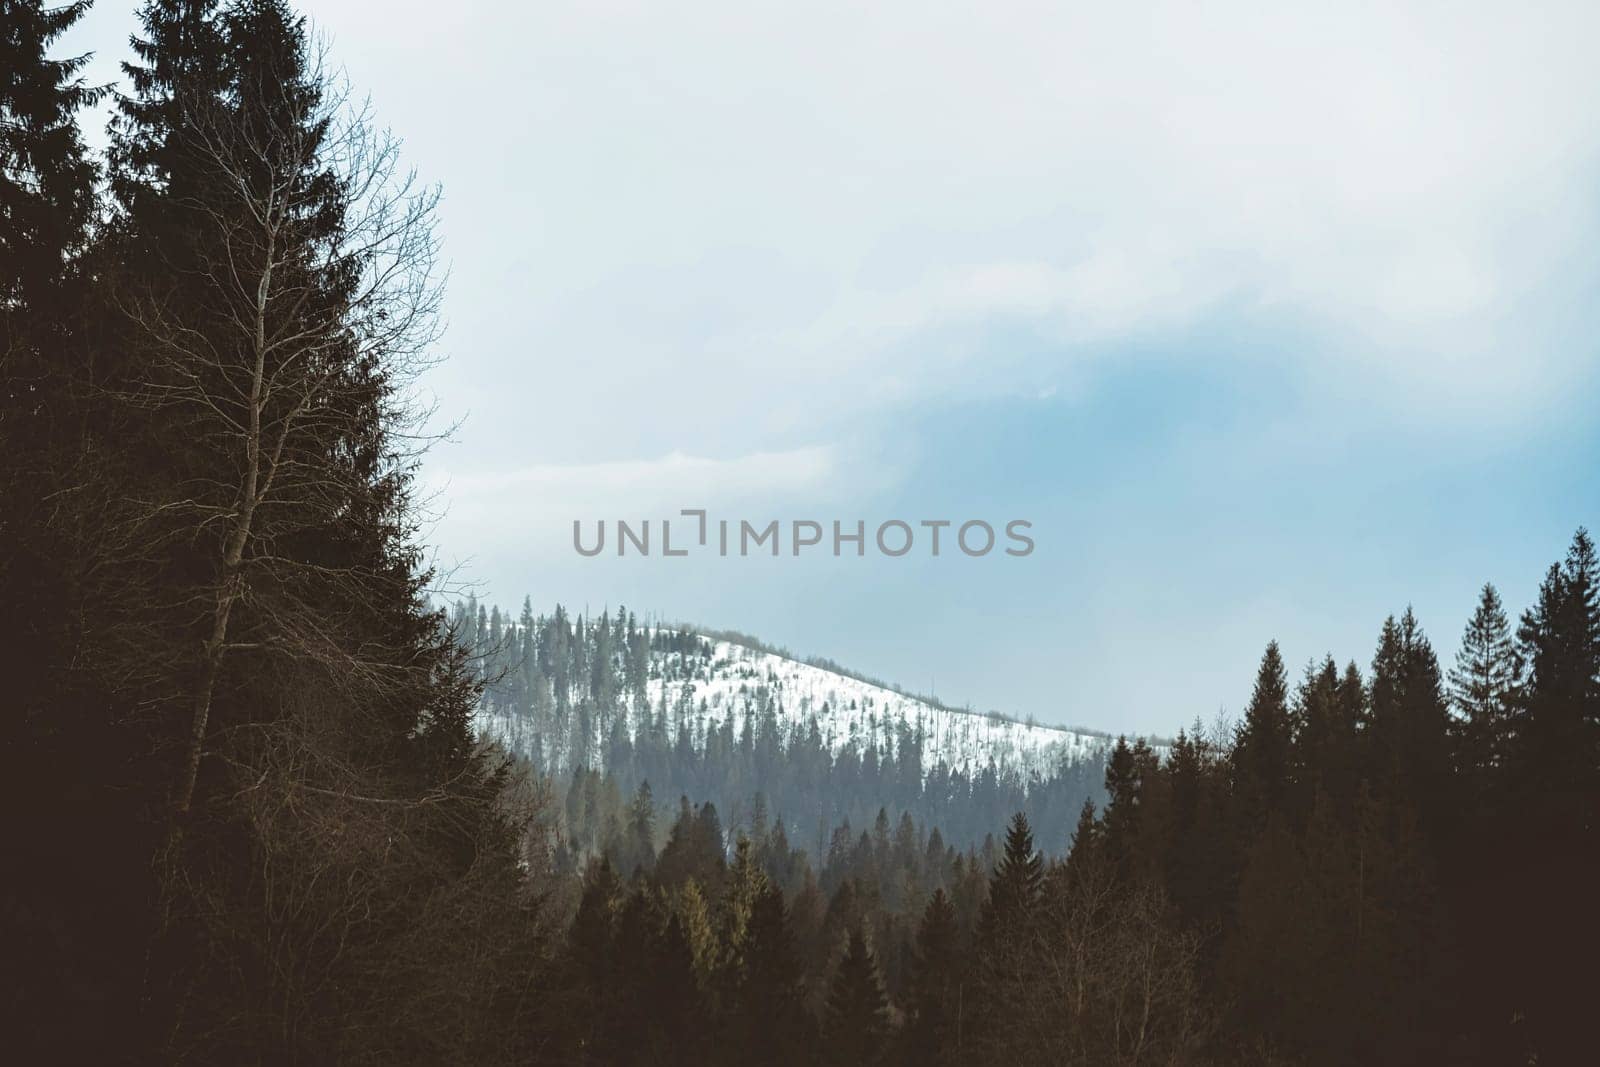 Forested mountain slope with the evergreen conifers shrouded in mist in a scenic landscape view download image